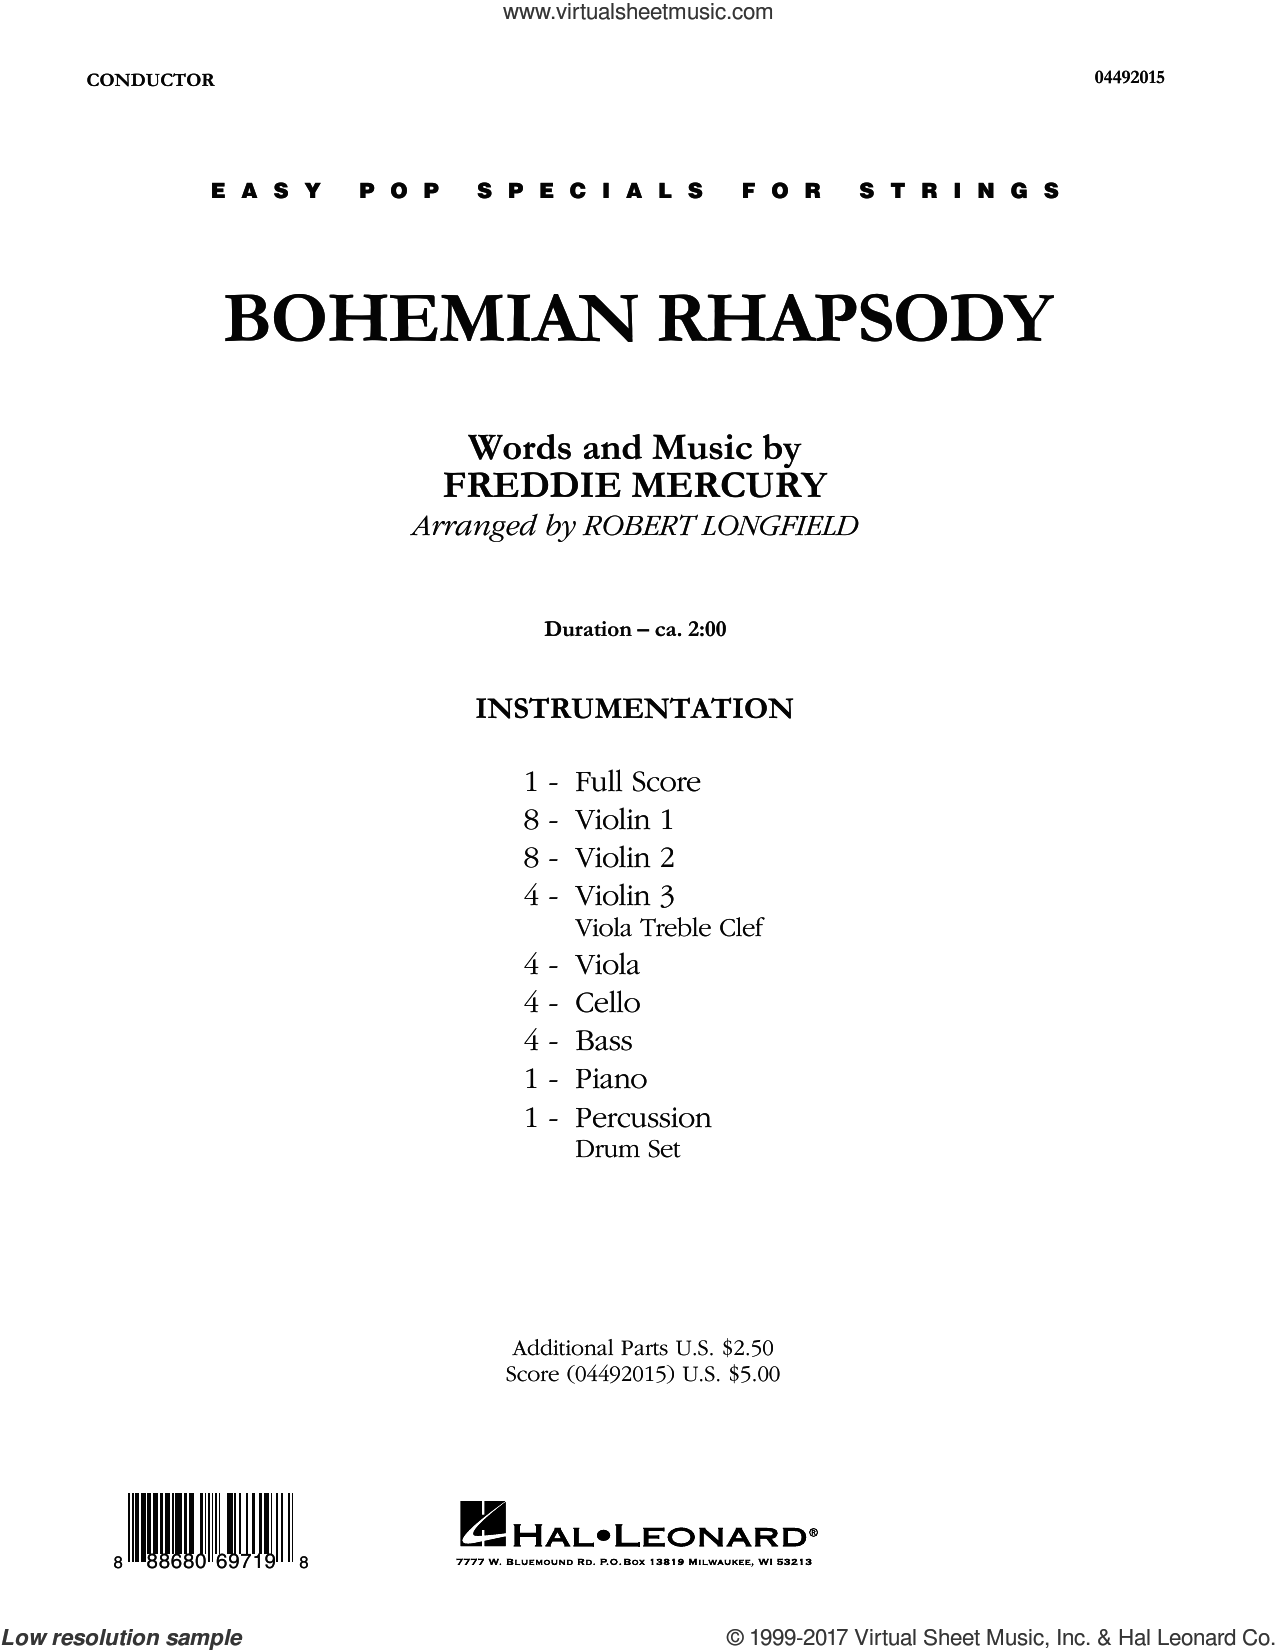 Bohemian Rhapsody sheet music (complete collection) for orchestra